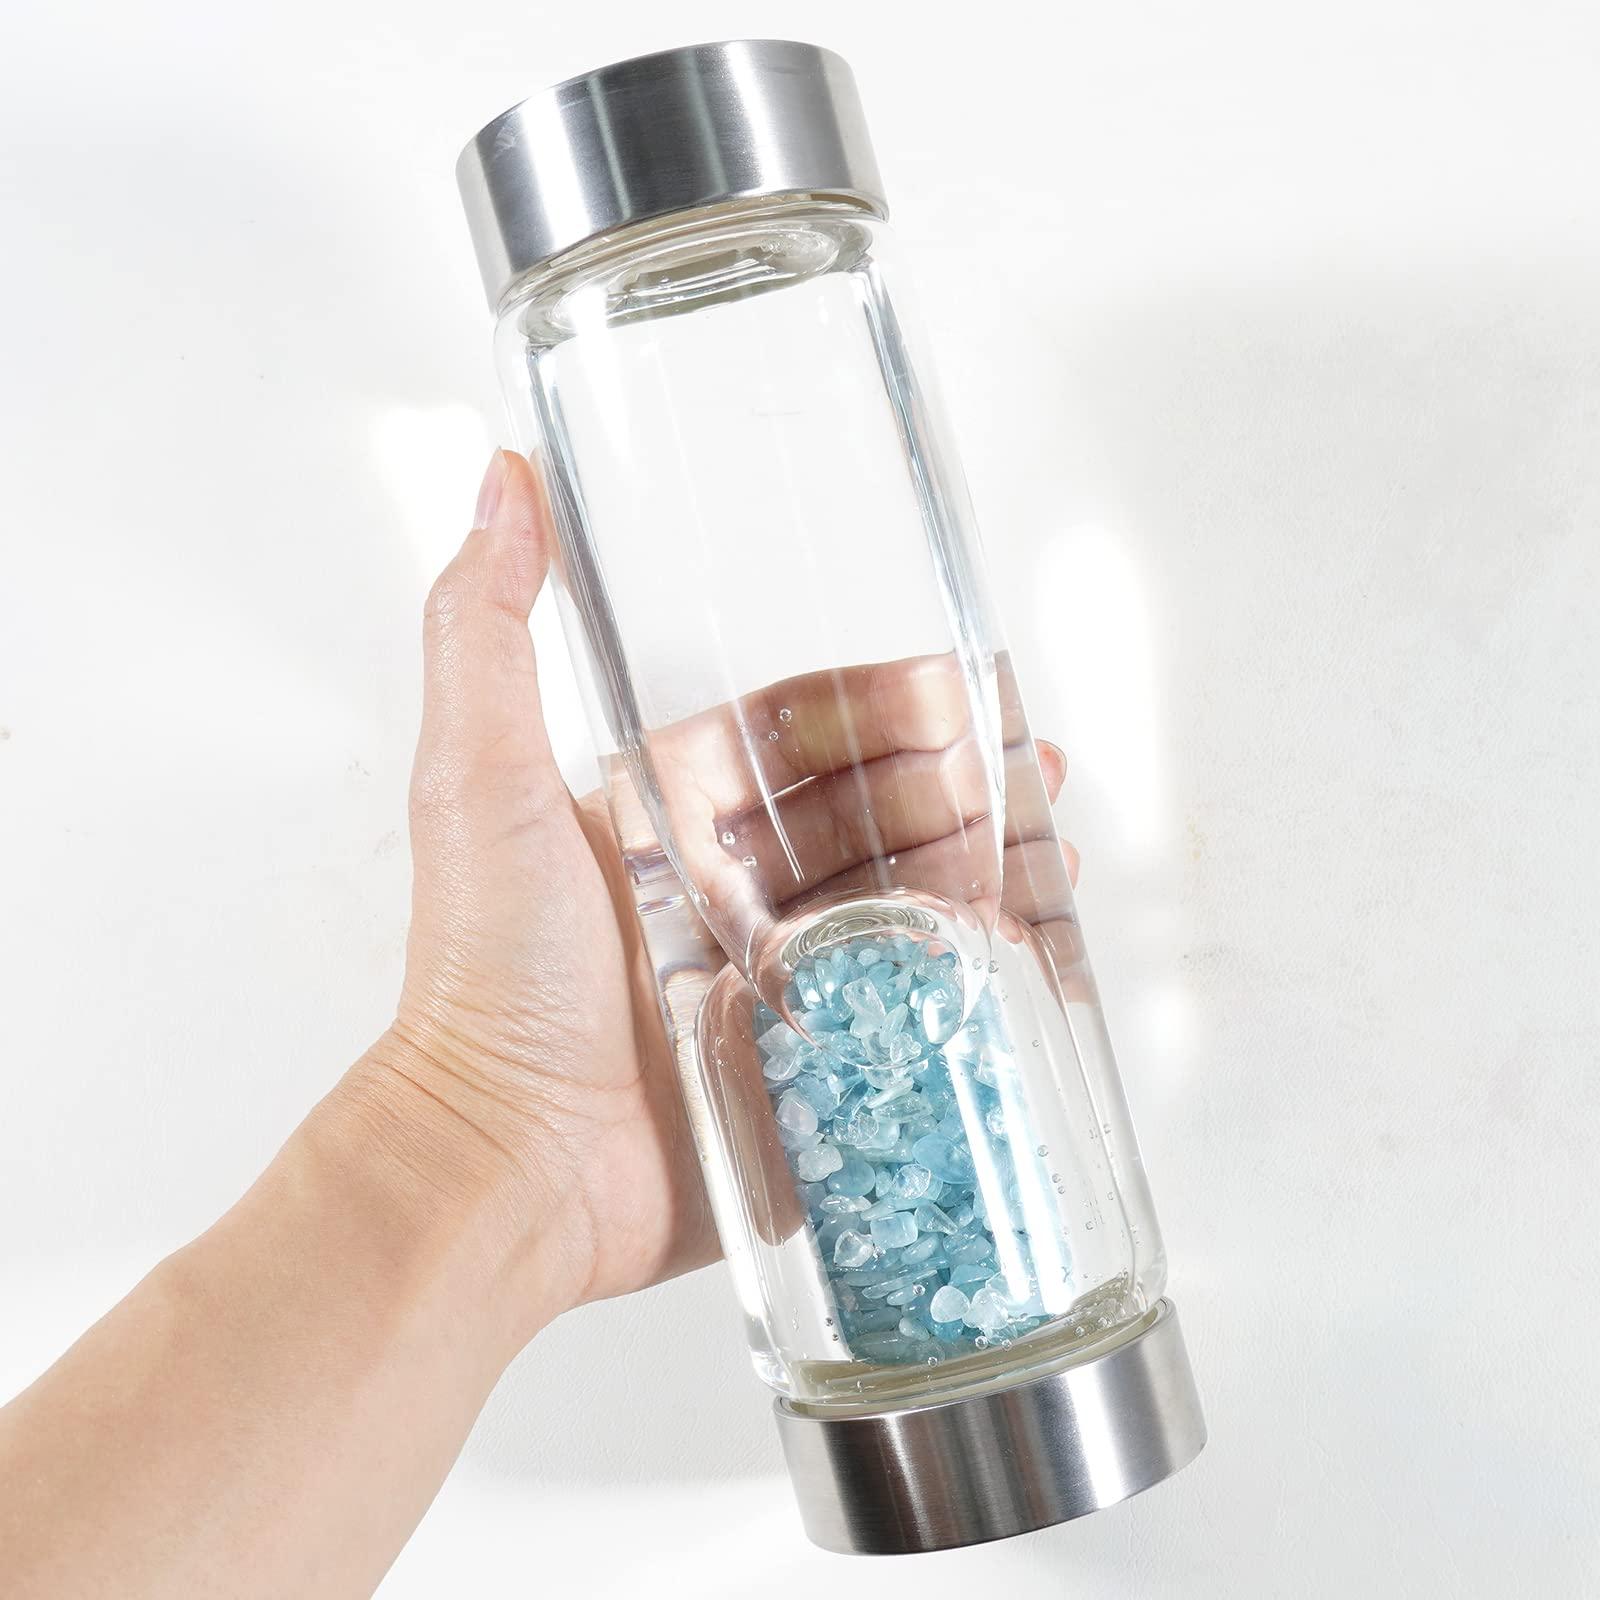 Soulnioi Crystal Glass Water Bottle Crystal, Drinking Flask Cylinder Glass Protective Cover with Crushed Stones Removable Portable Proof Leak Gemstone Bottle Creative Gift- Green/550ML 4